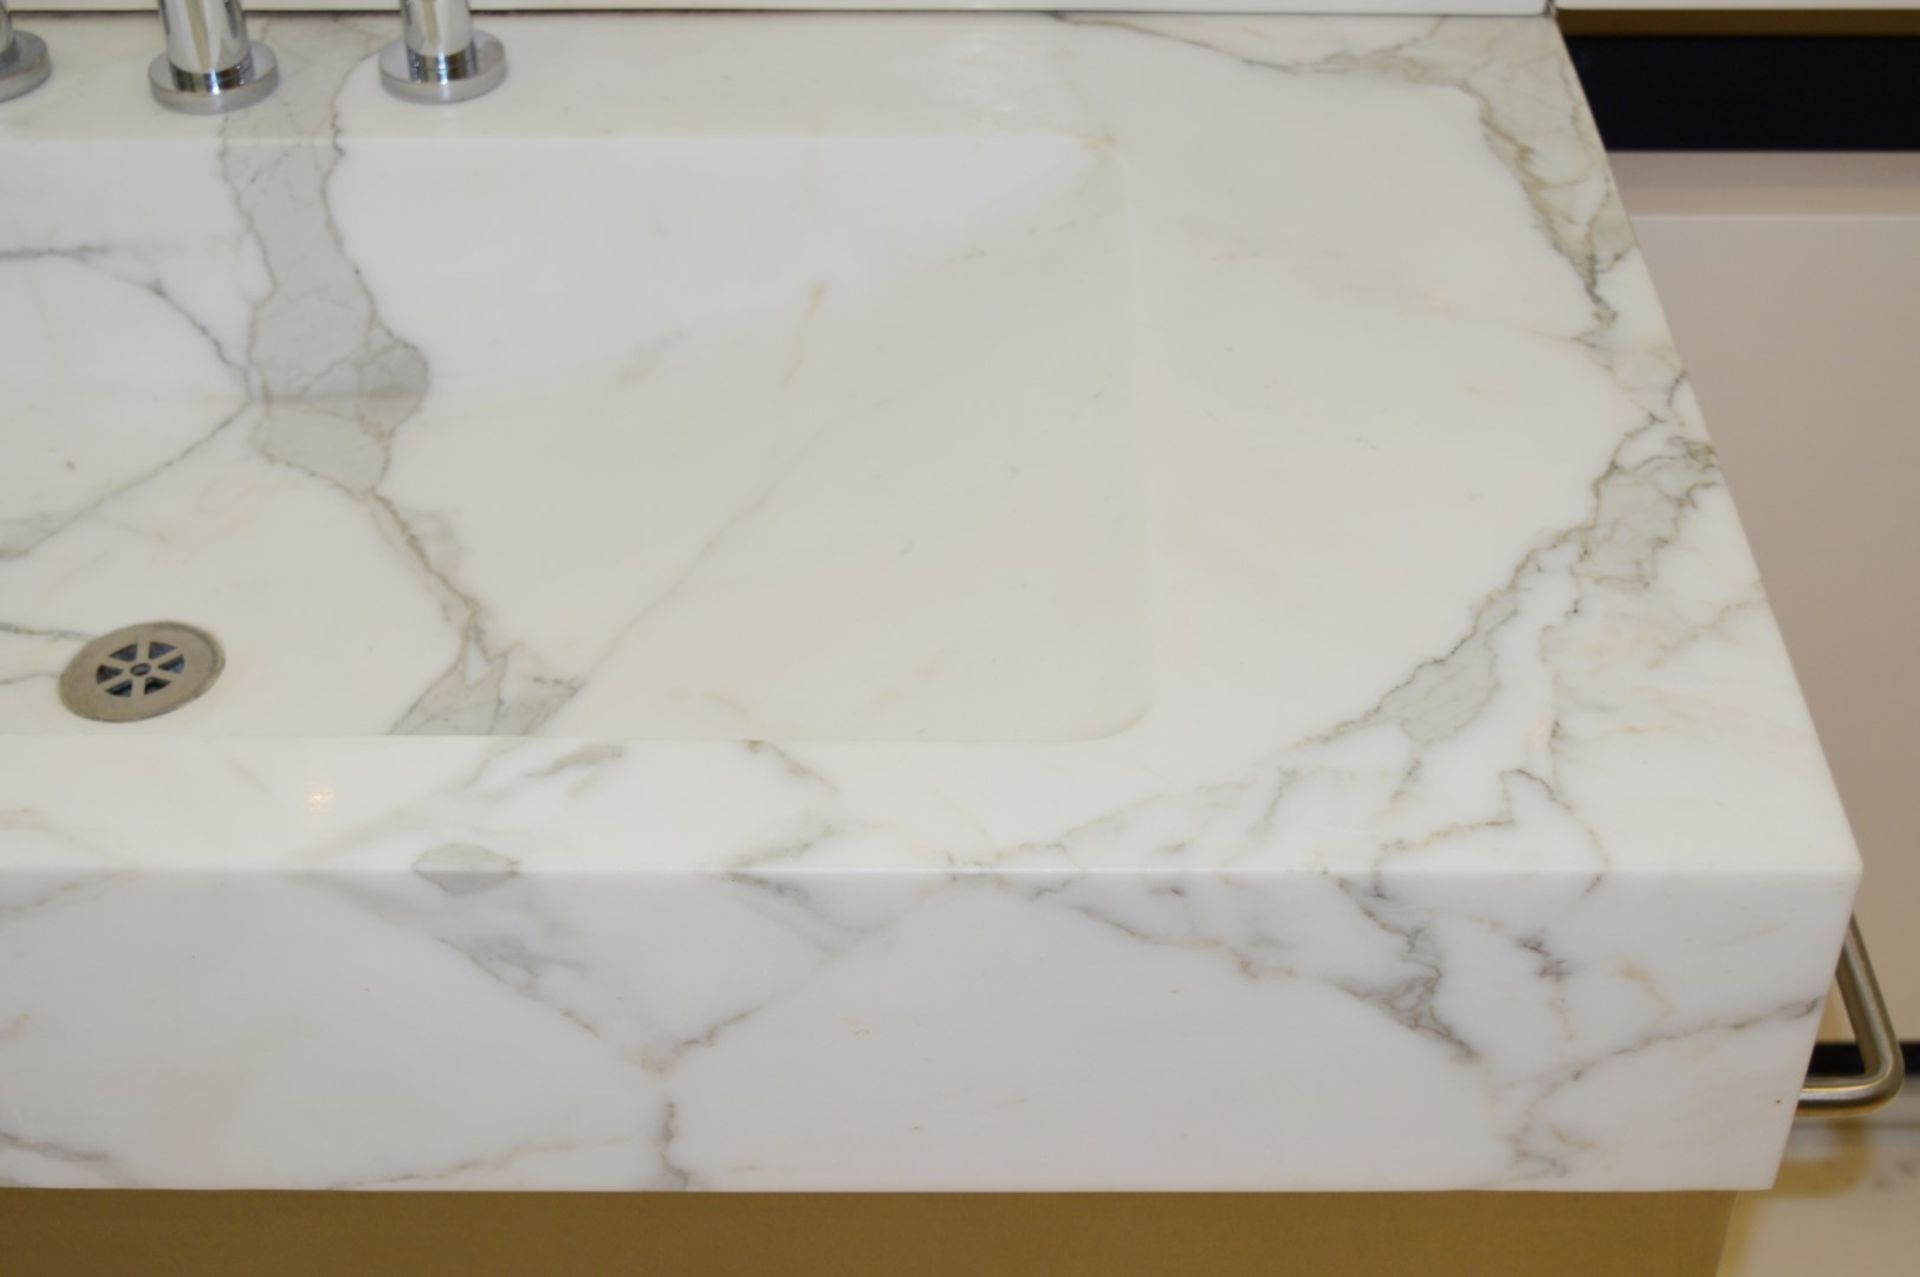 1 x Bespoke His & Hers Marble Bathroom Vanity Unit - Exquisite 7ft Twin Marble Sink Basin With Two - Image 19 of 25